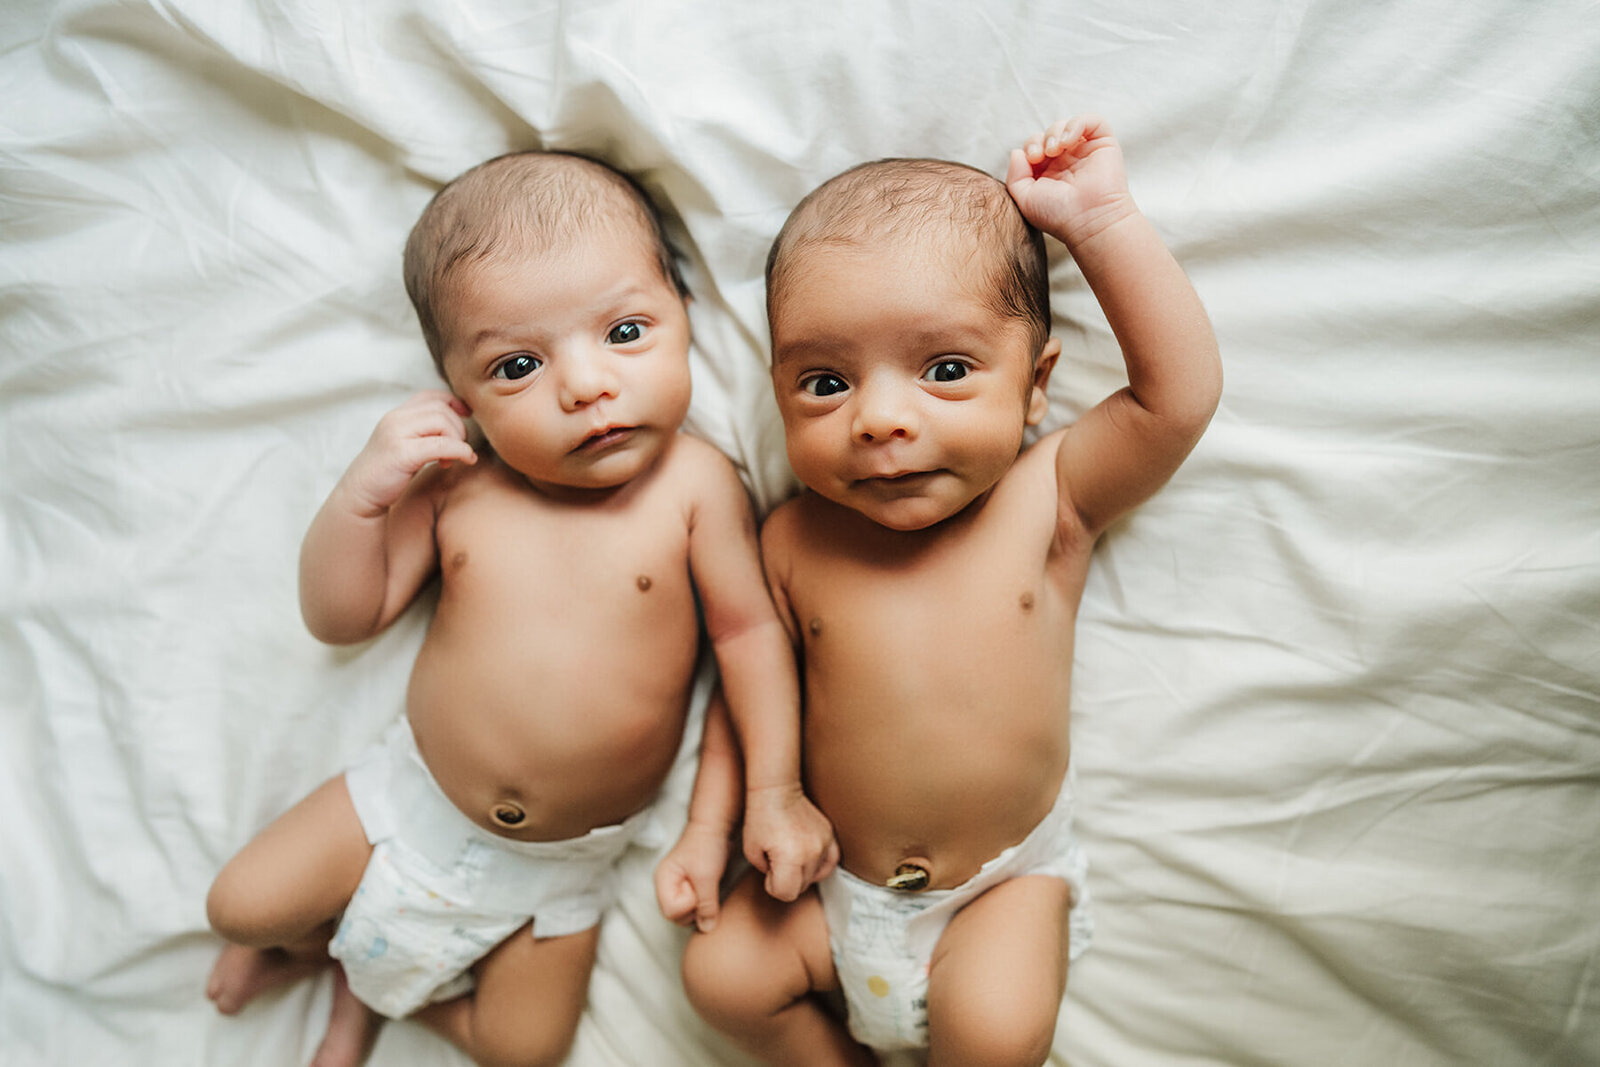 twin babies in diapers lay on white bedspread and stare at camera